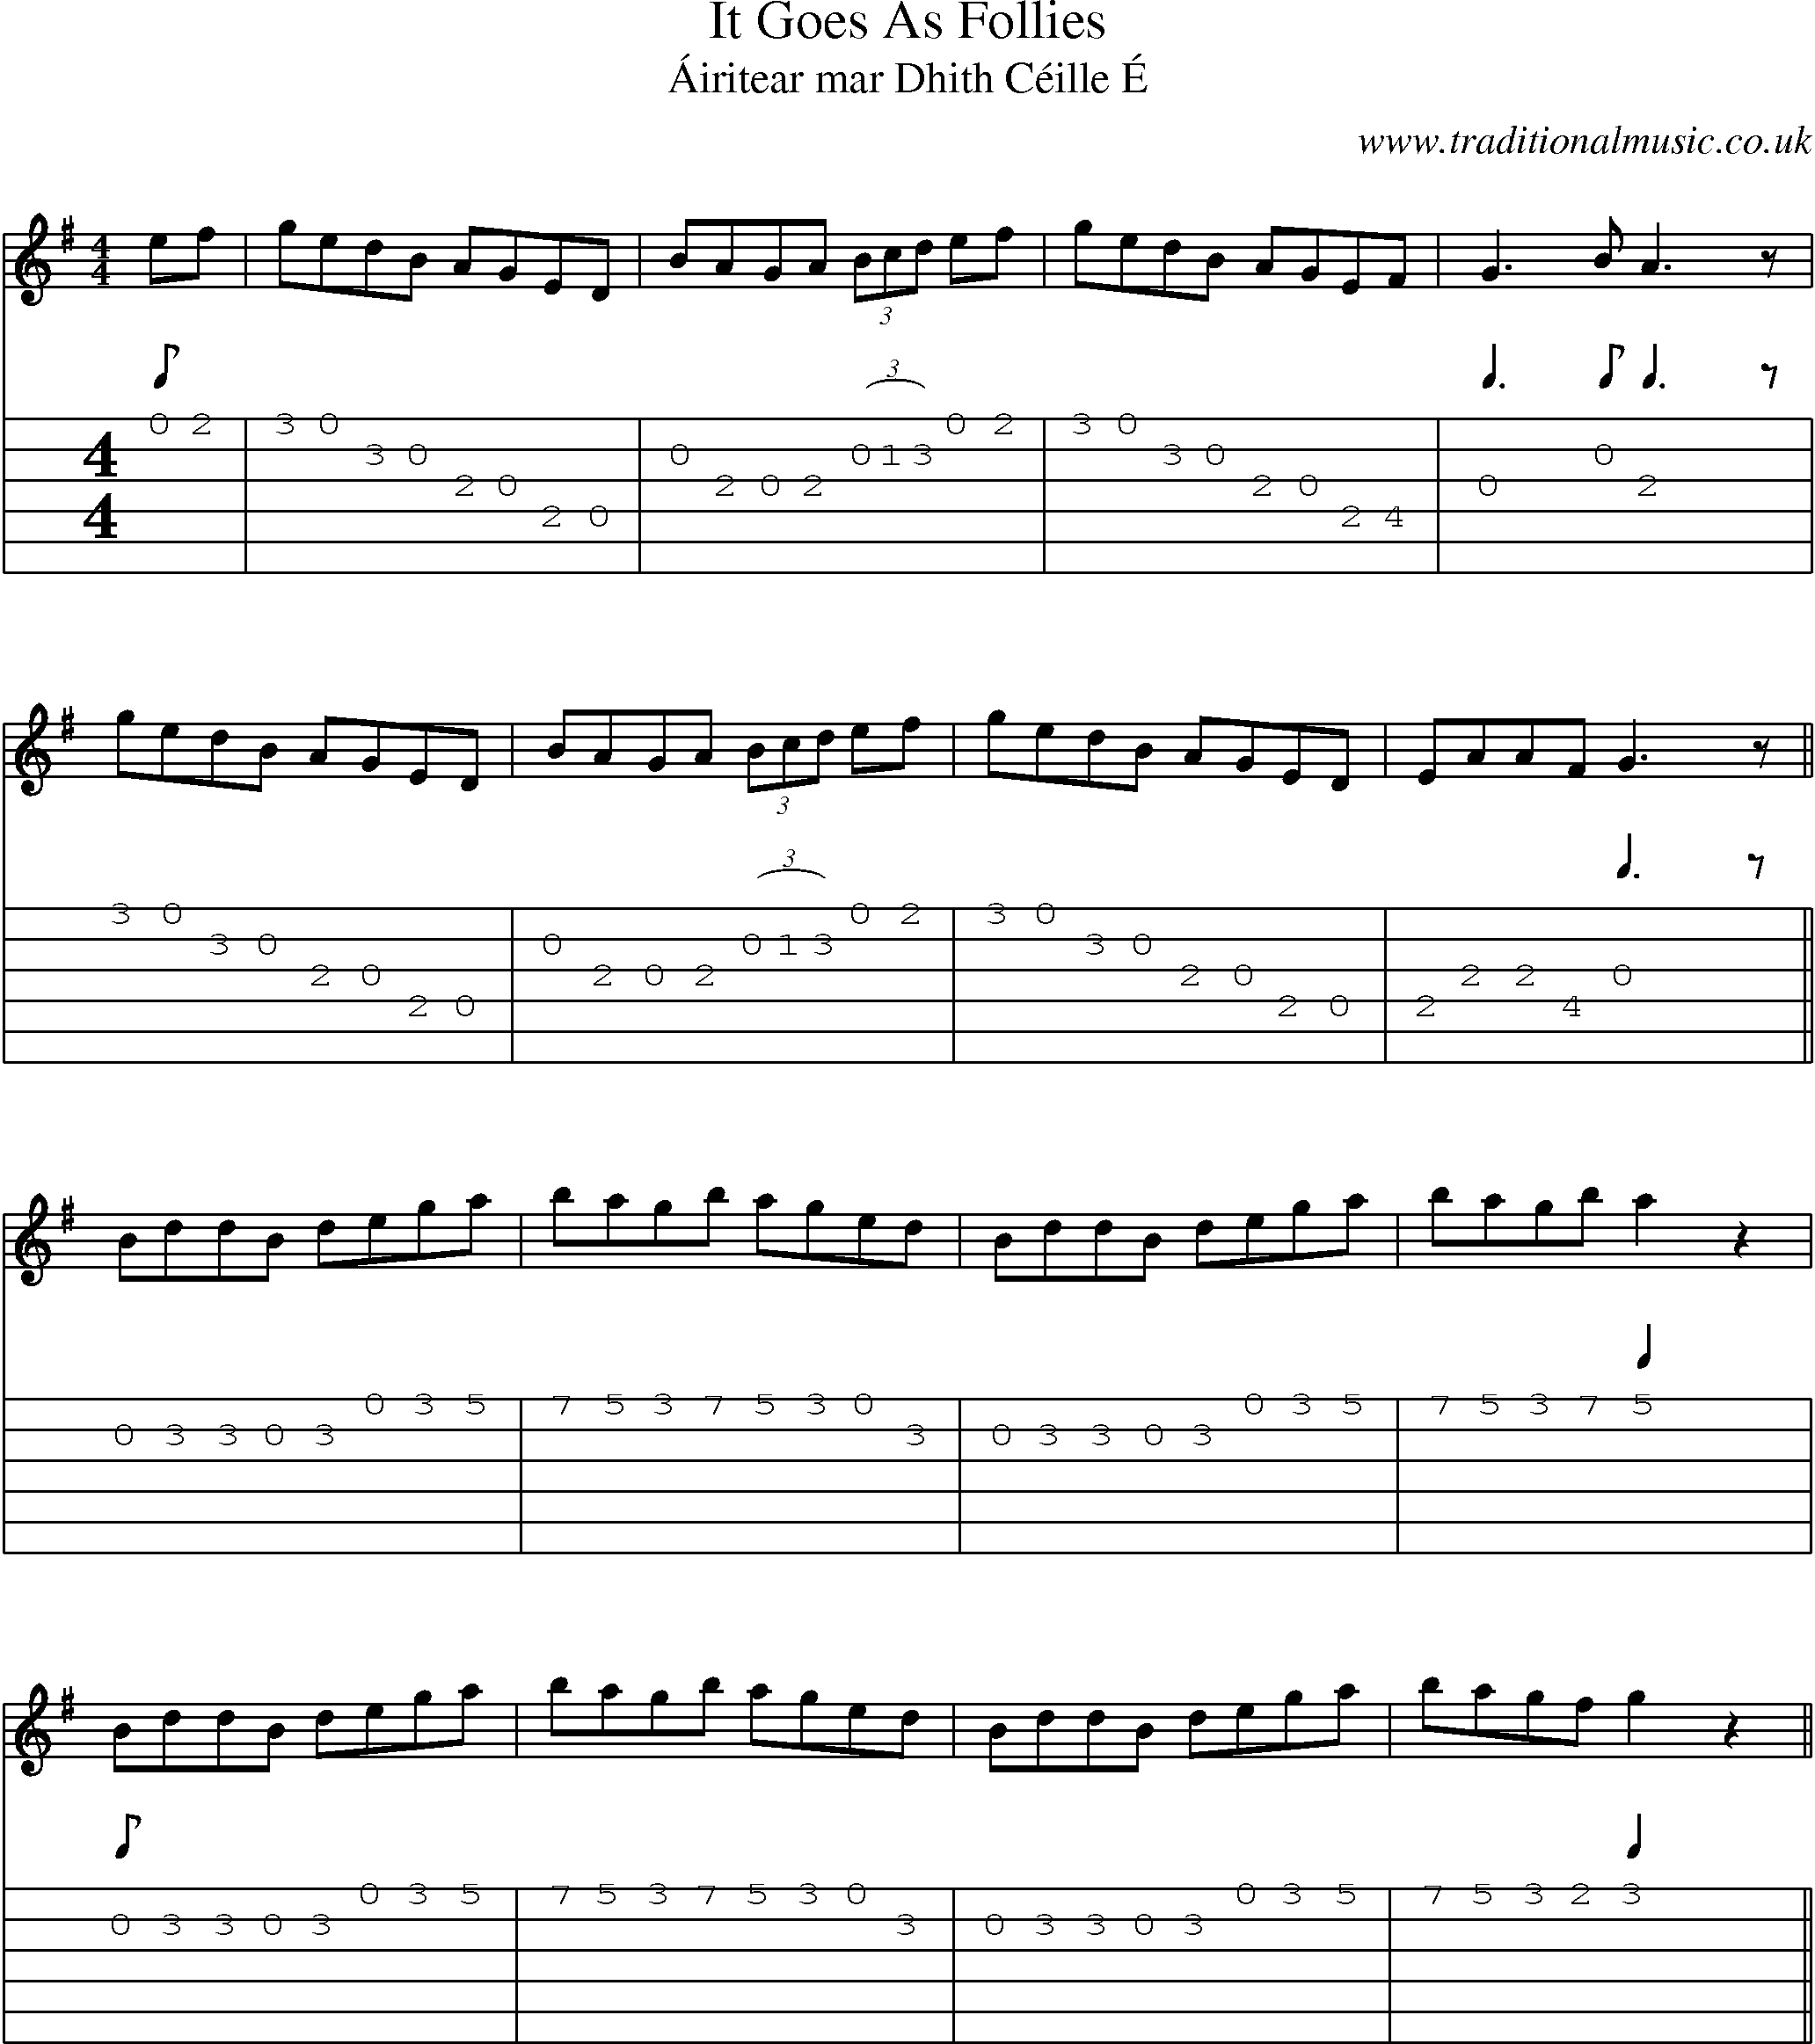 Music Score and Guitar Tabs for It Goes As Follies